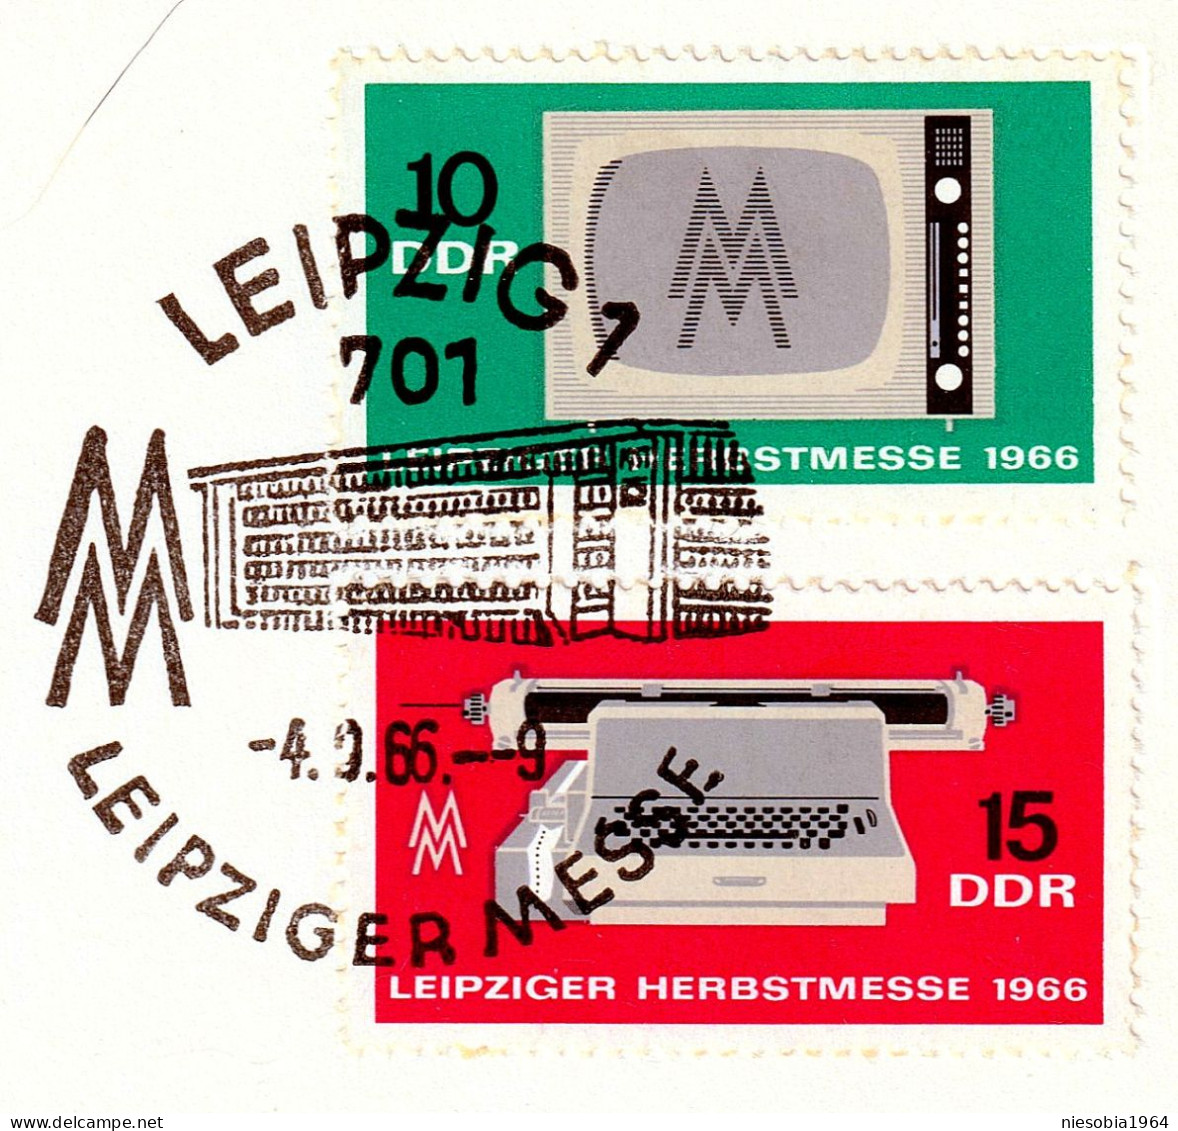 20 Years Of Peace Fair Autumn Fair LEIPZIG 1966 - Two Stamps + Occasional Seals - Postcards - Used